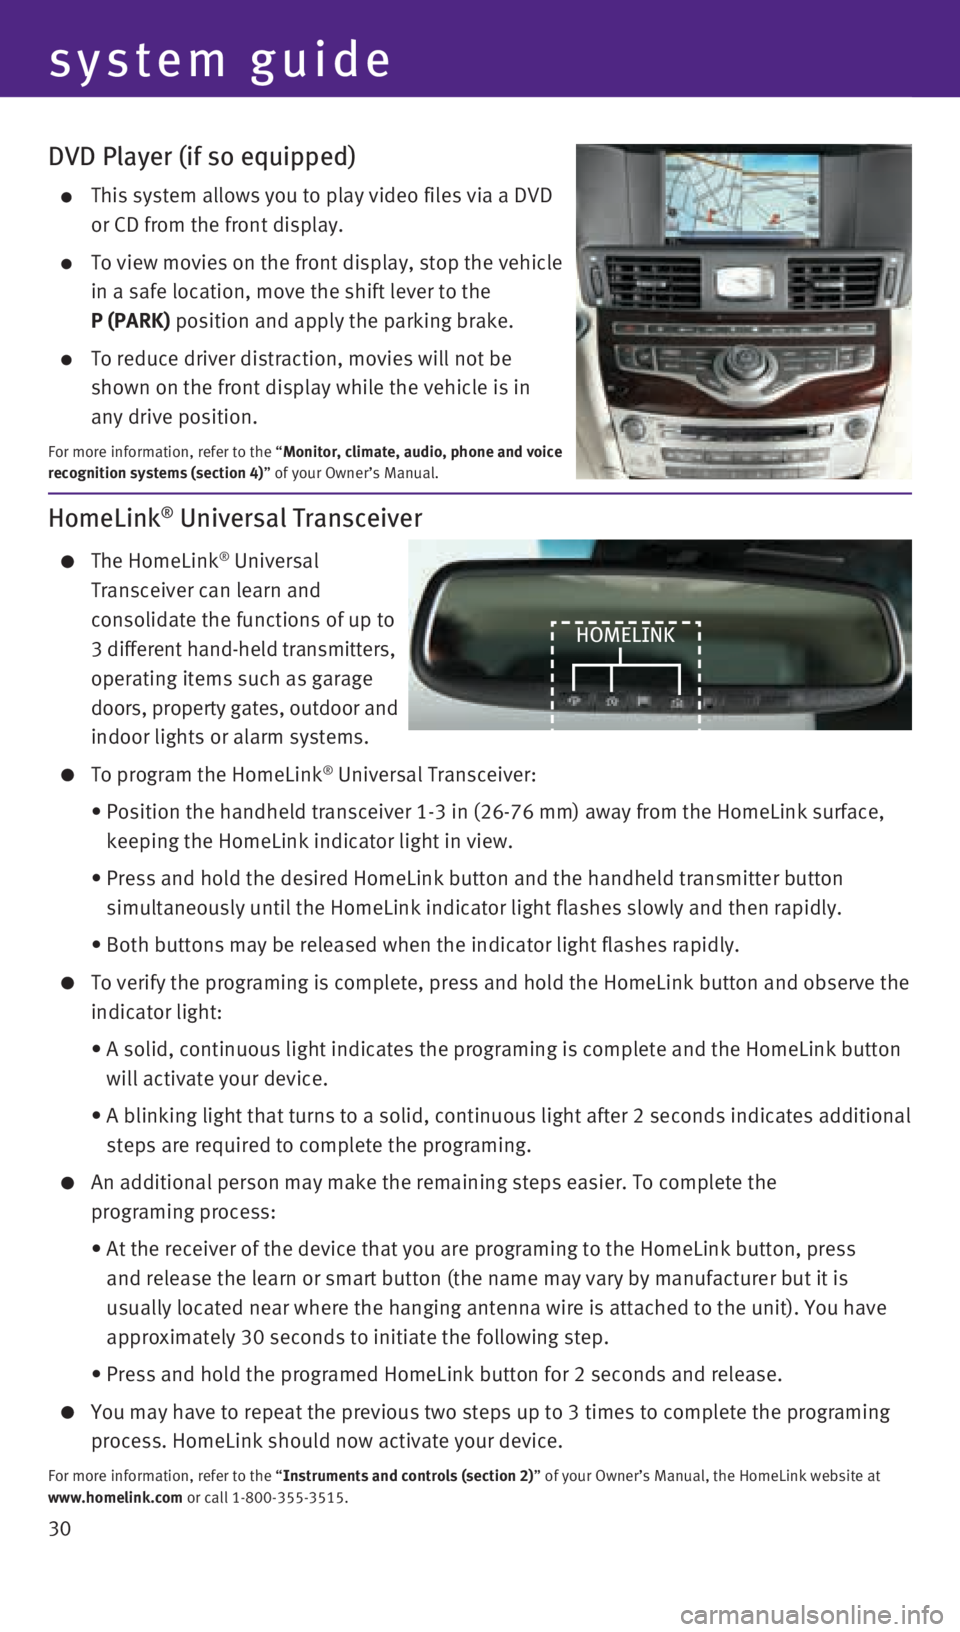 INFINITI Q70 HYBRID 2016  Quick Reference Guide 30
DVD Player (if so equipped)
    This system allows you to play video files via a DVD  
or CD from the front display.
 
    To view movies on the front display, stop the vehicle  
in a safe location